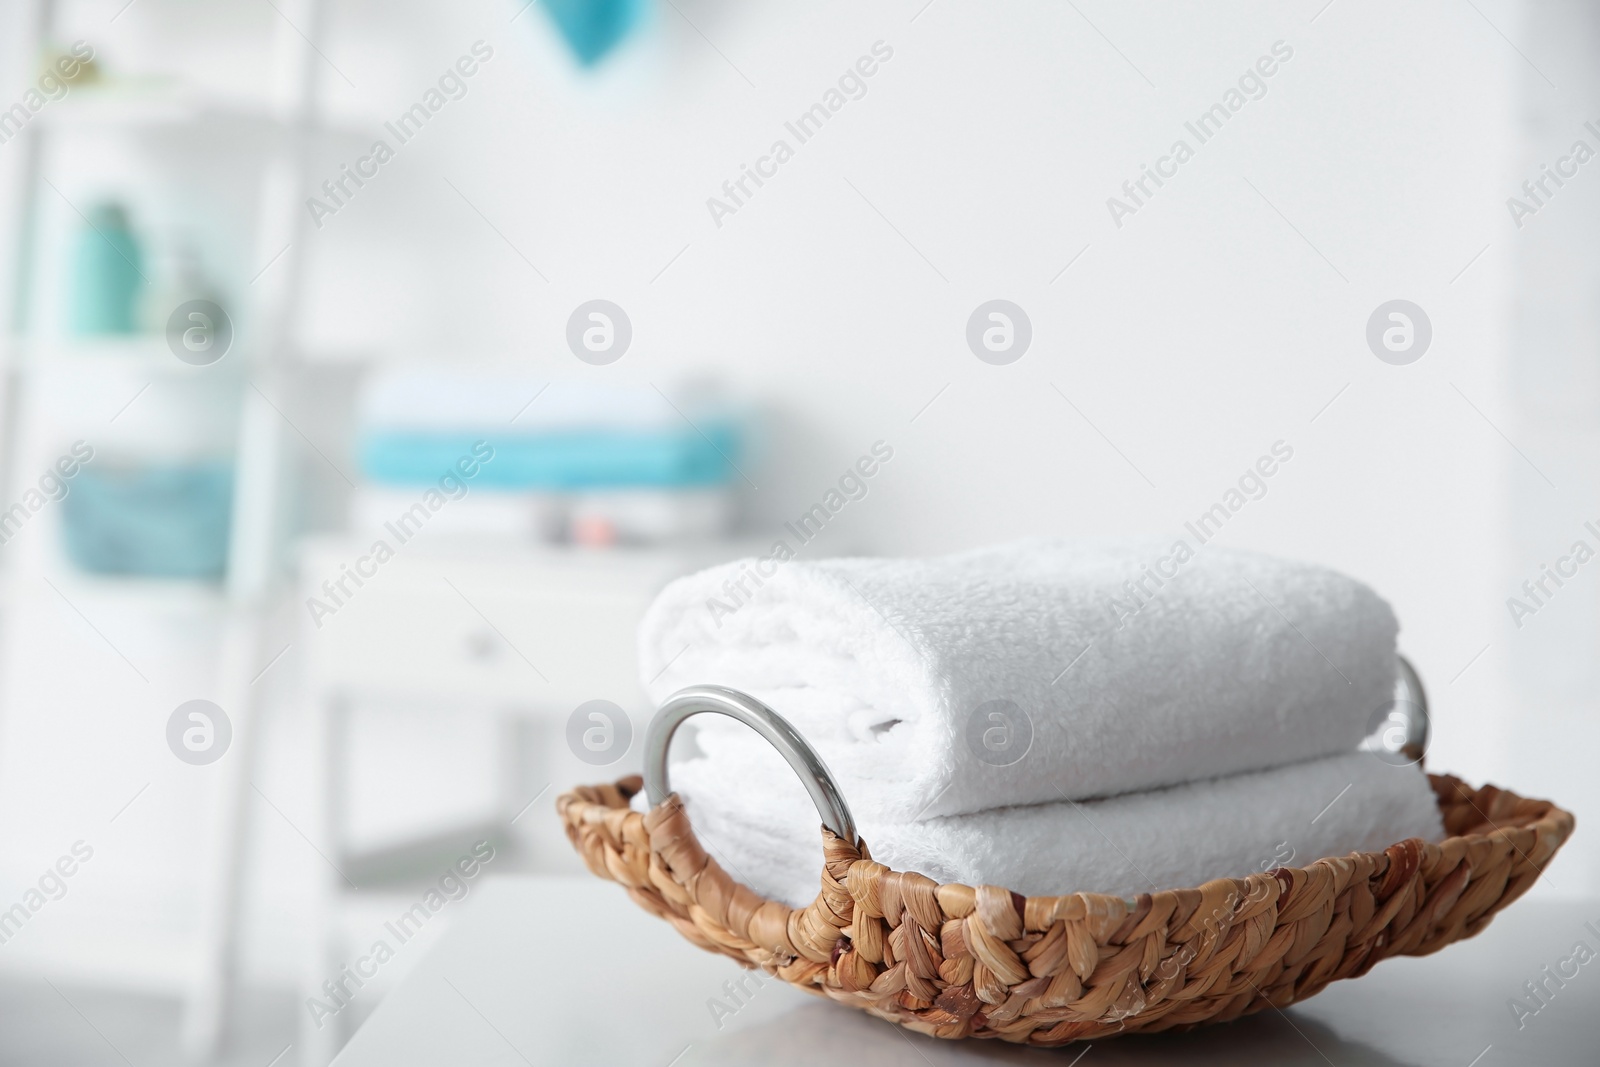 Photo of Wicker tray with towels on table against blurred background